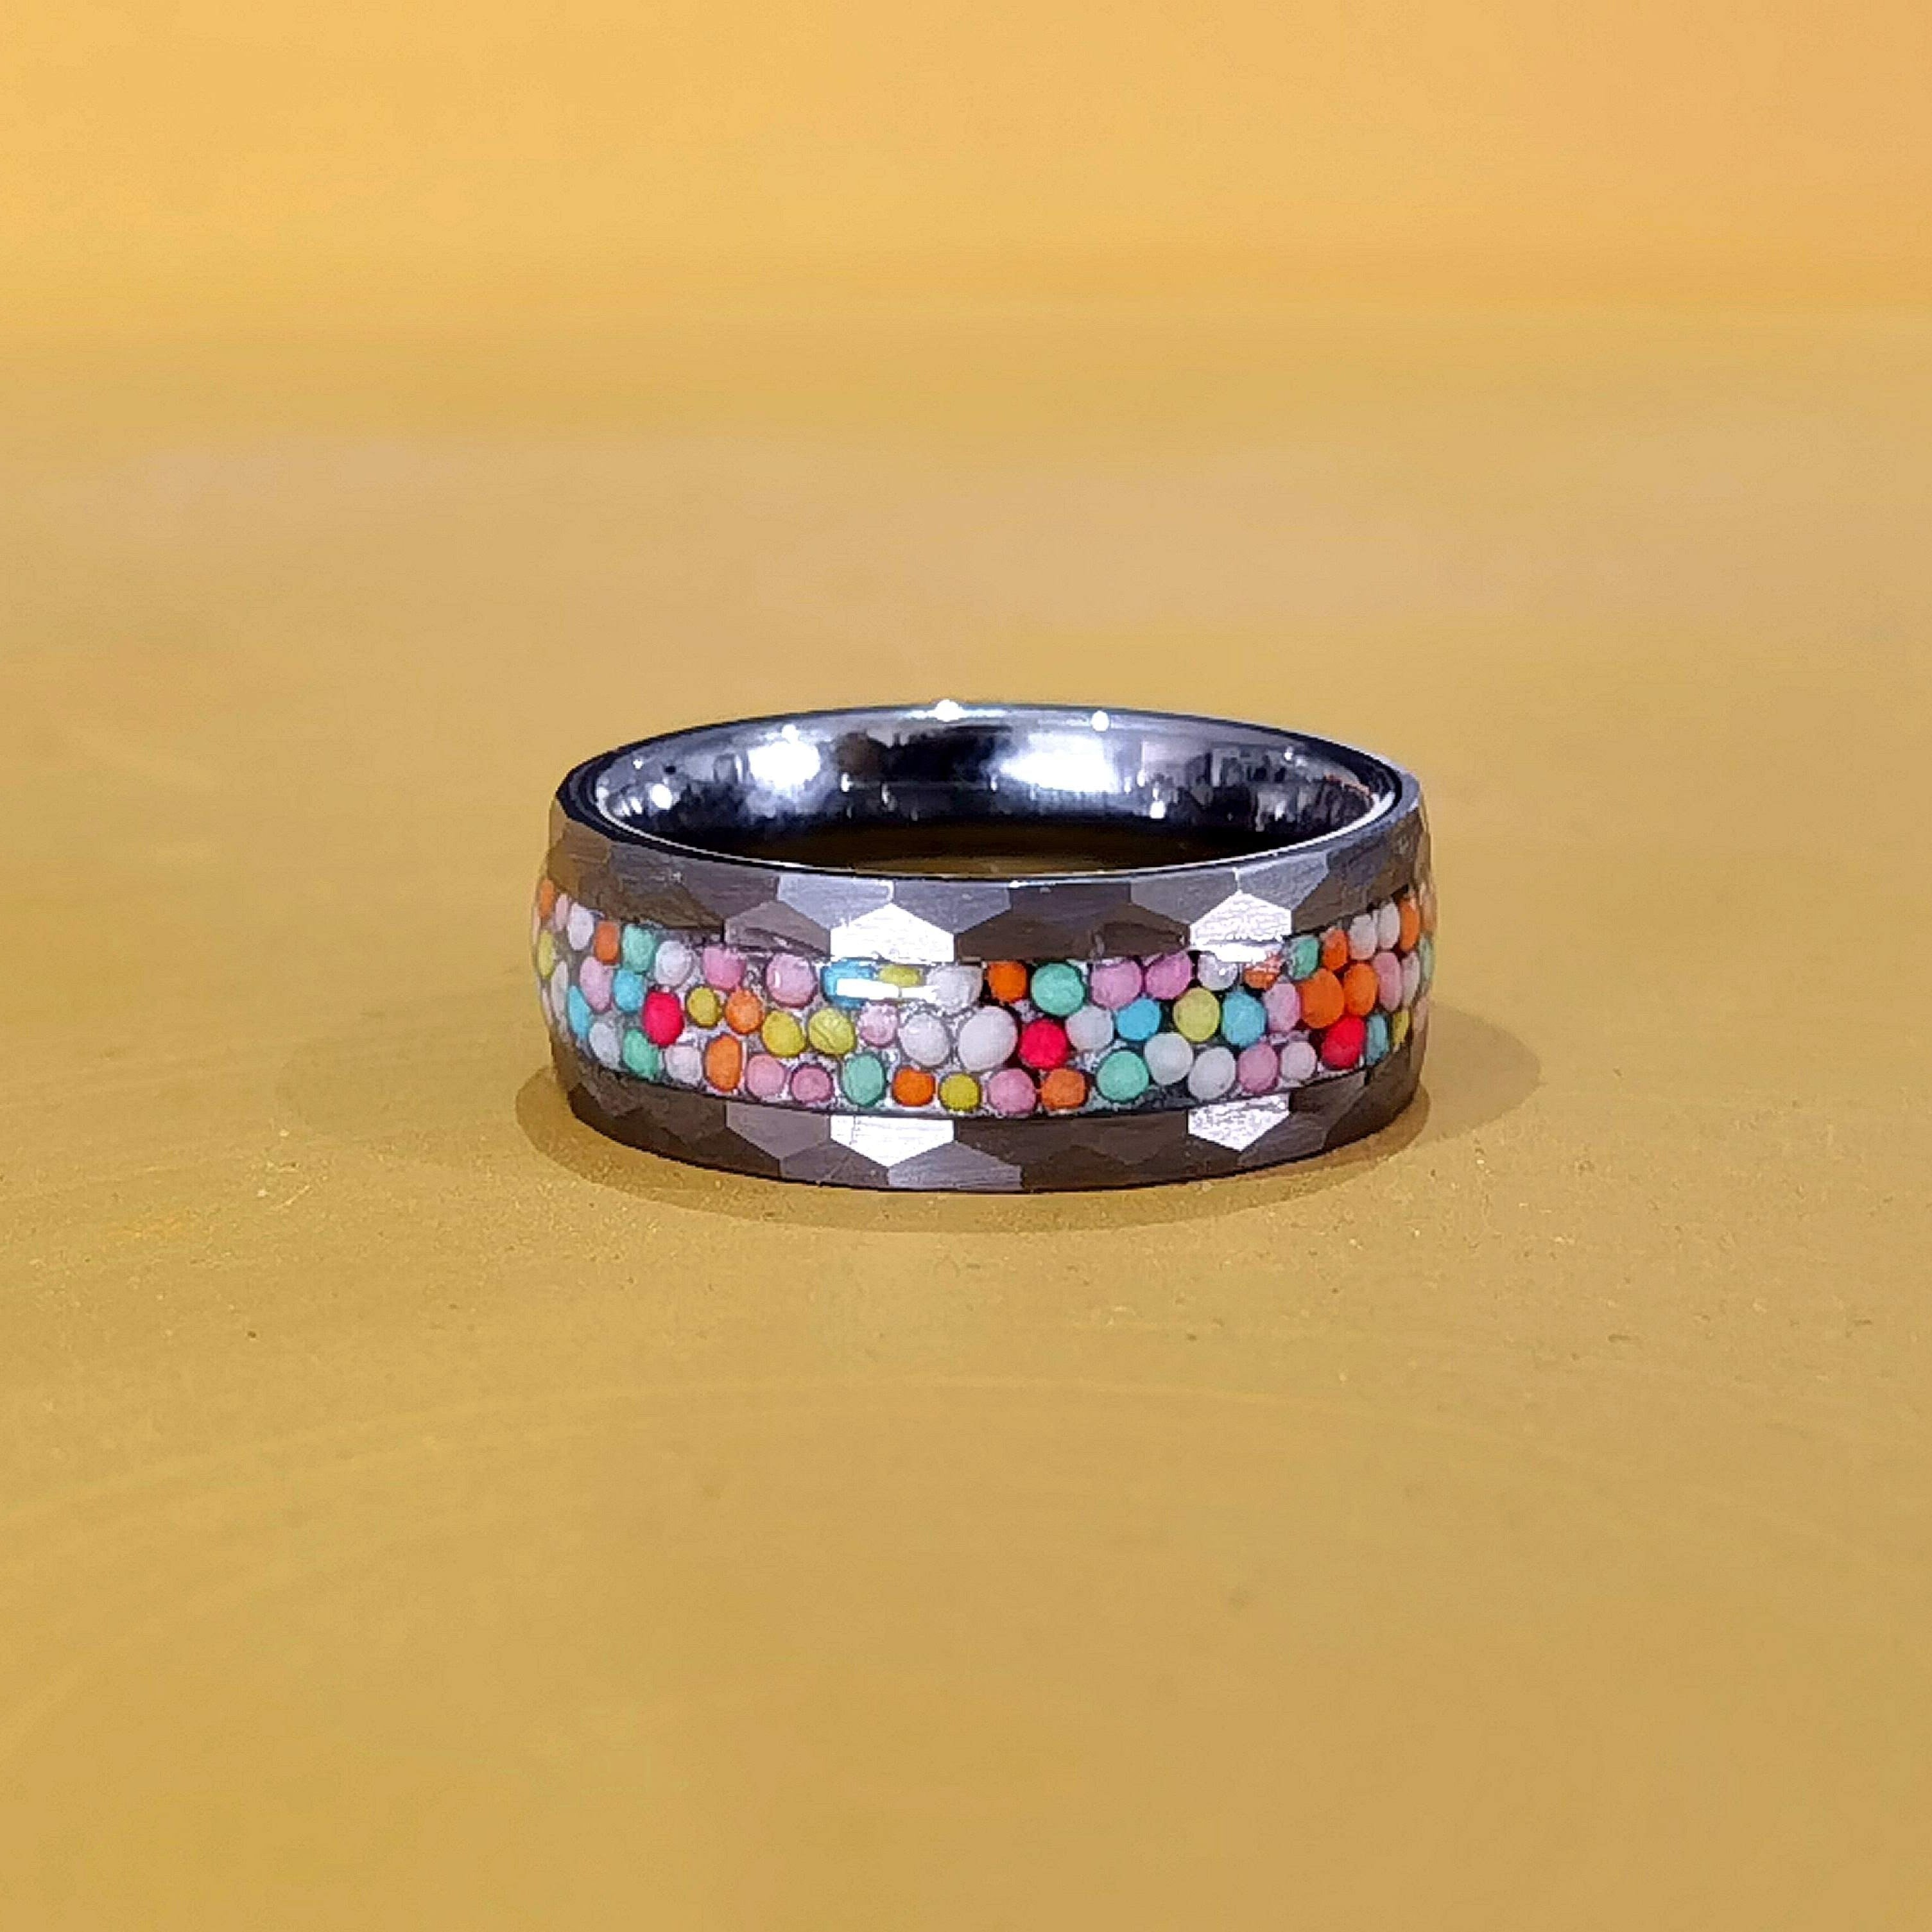 The 100's & 1000's Ring (Limited Edition) - A child's favourite thing inside a Tungsten Ring